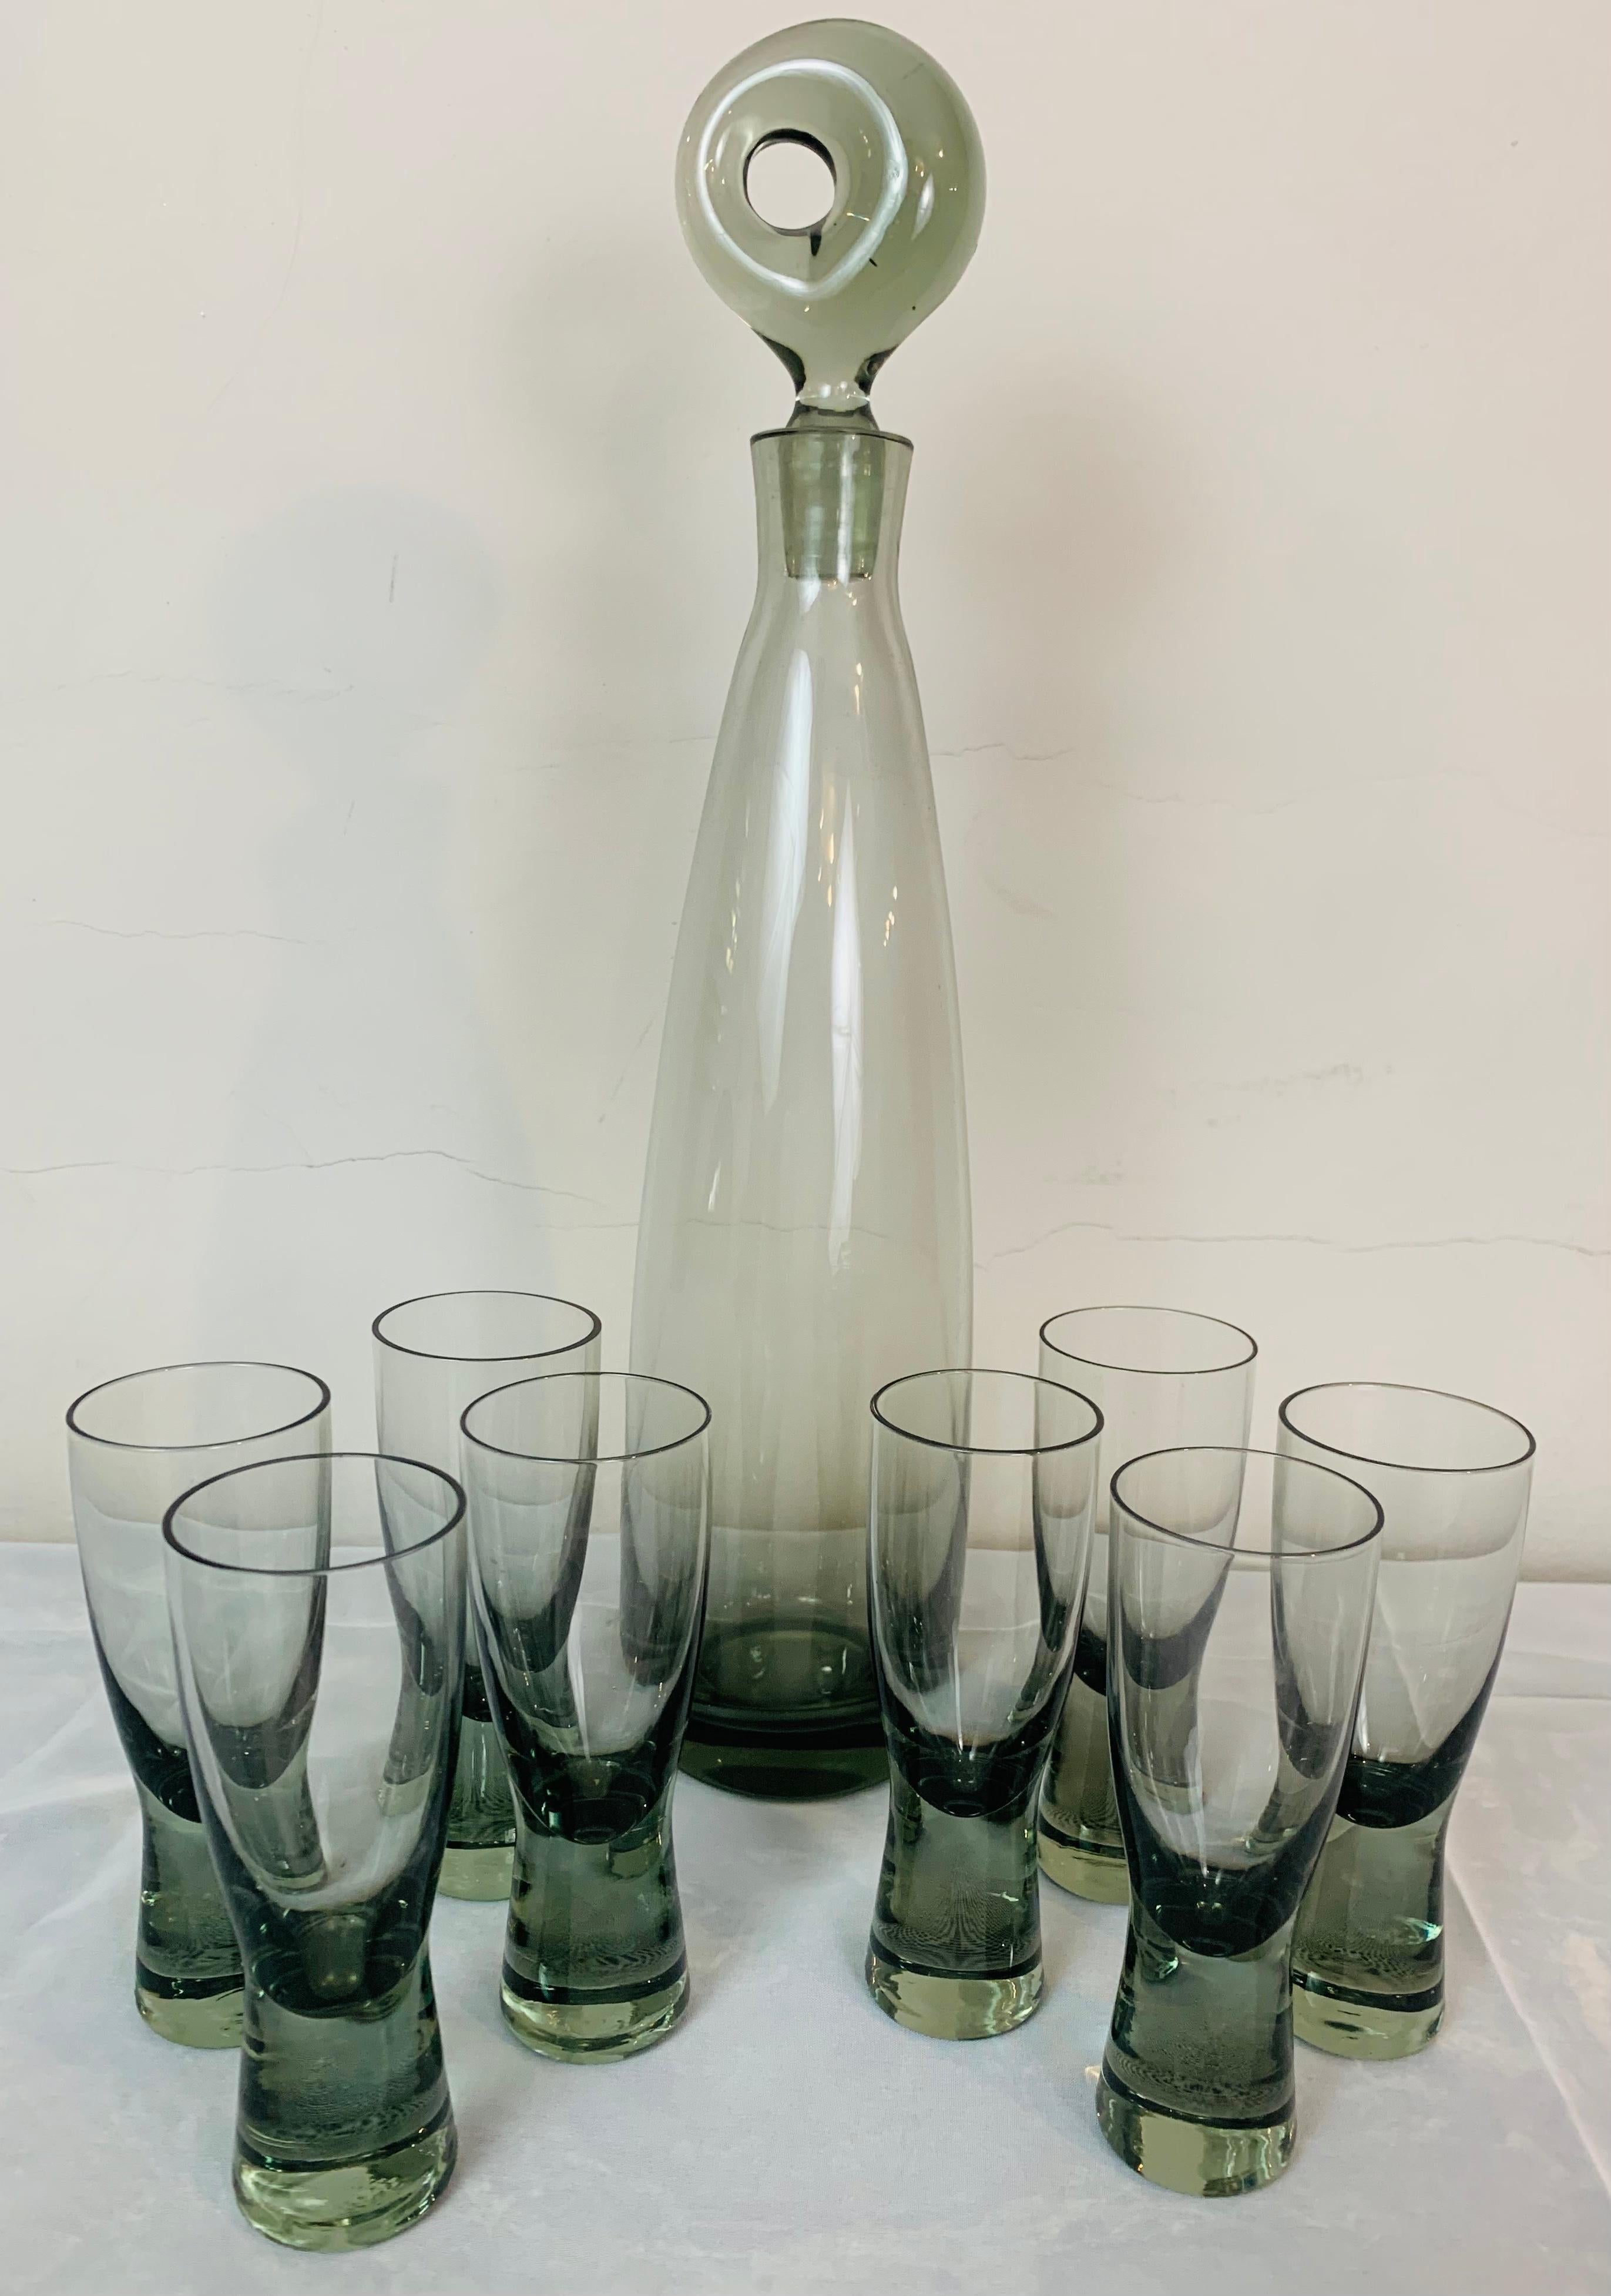 Set of 8 1960s Danish Holmegaard Canada smoked grey tinted aperitif/schnapps glasses and Aristokat decanter & stopper designed by Per Lütken. The glasses are from the Model Scanada range.

The Aristokat, an elegant, hand-blown, cylindrical,